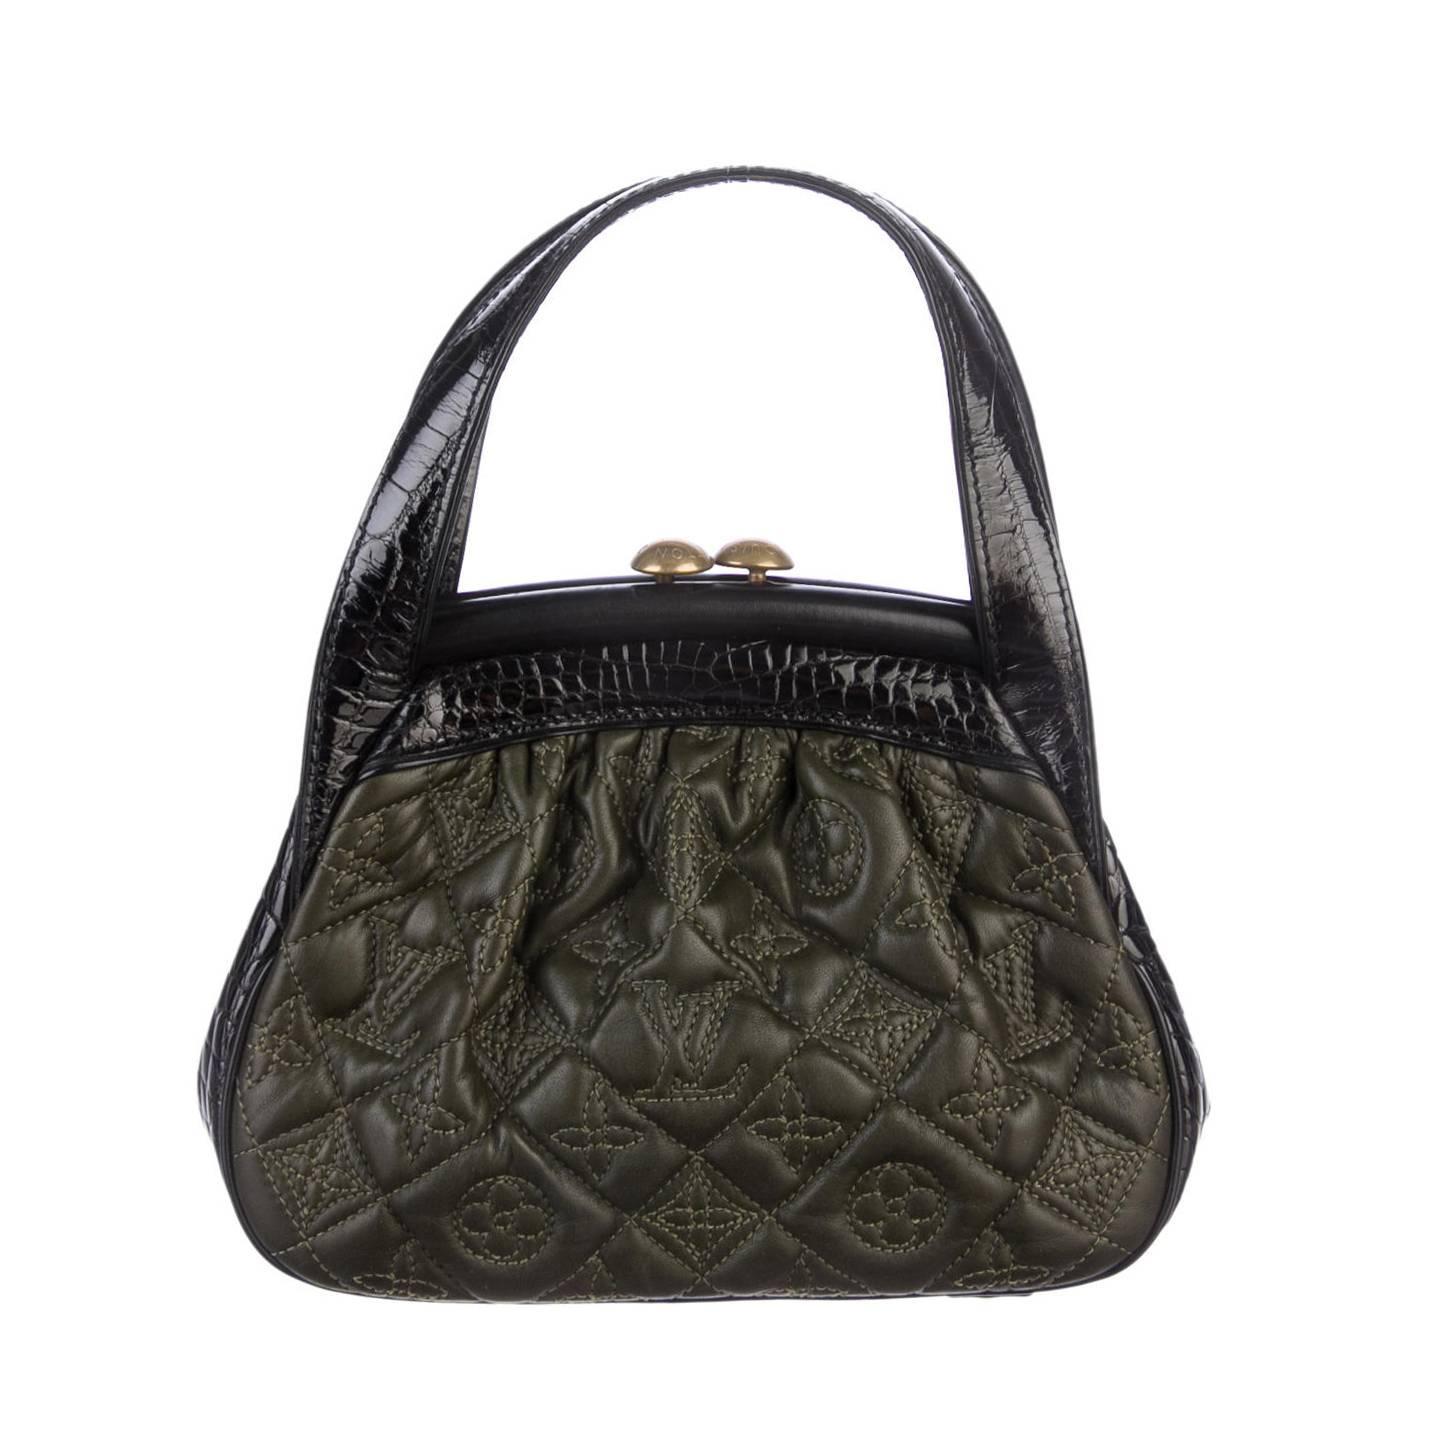 Louis Vuitton Olive Green Monogram Leather and Alligator Top Handle Satchel Bag at 1stdibs